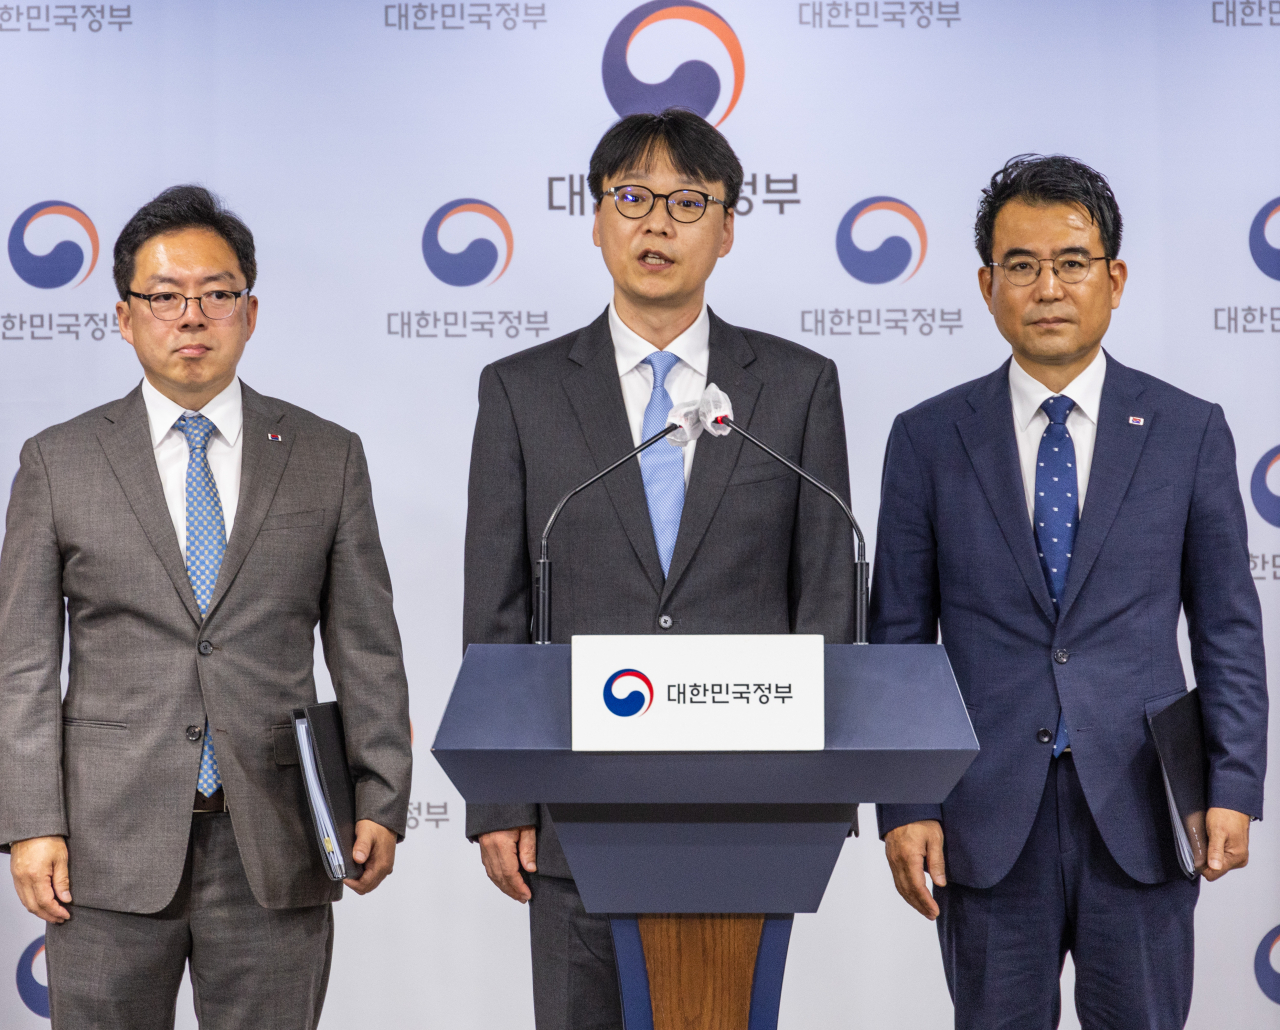 Yoon Seung-young, director general for investigation at the National Office of Investigation (left); Hwang Byung-ju, assistant prosecutor general of criminal department at Supreme Prosecutors' Office (second from left); and Nam Young-woo, director general of the land policy bureau at the Ministry of Land, Infrastructure and Transport, deliver a briefing at the Government Complex Seoul Thursday. (Yonhap)